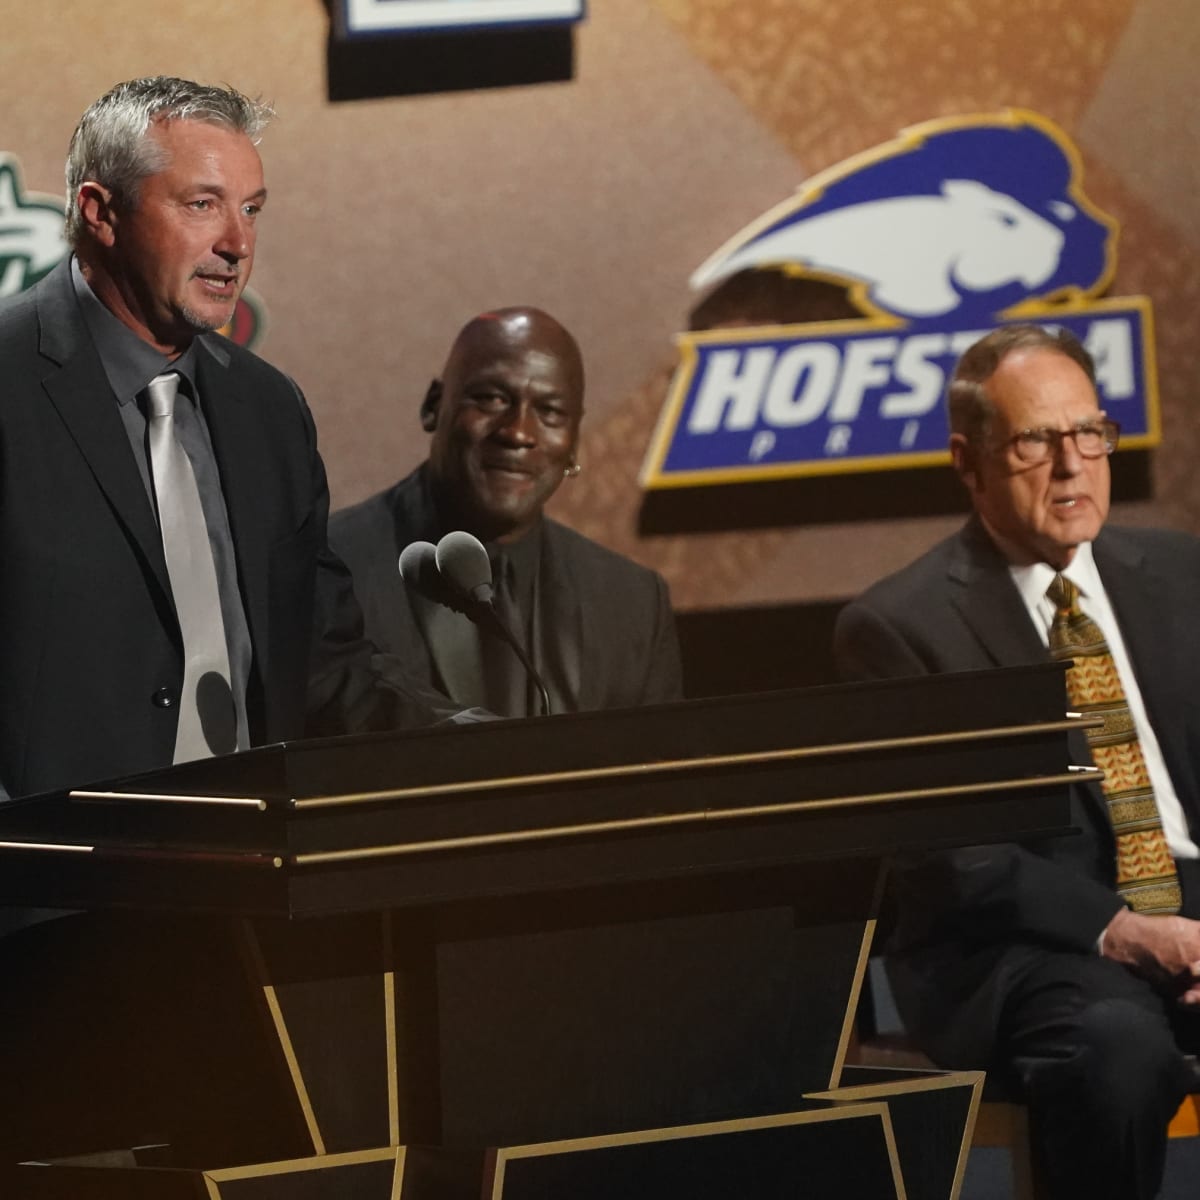 Toni Kukoc, Hall of Famer: 6 revealing facts about the ultimate 6th man